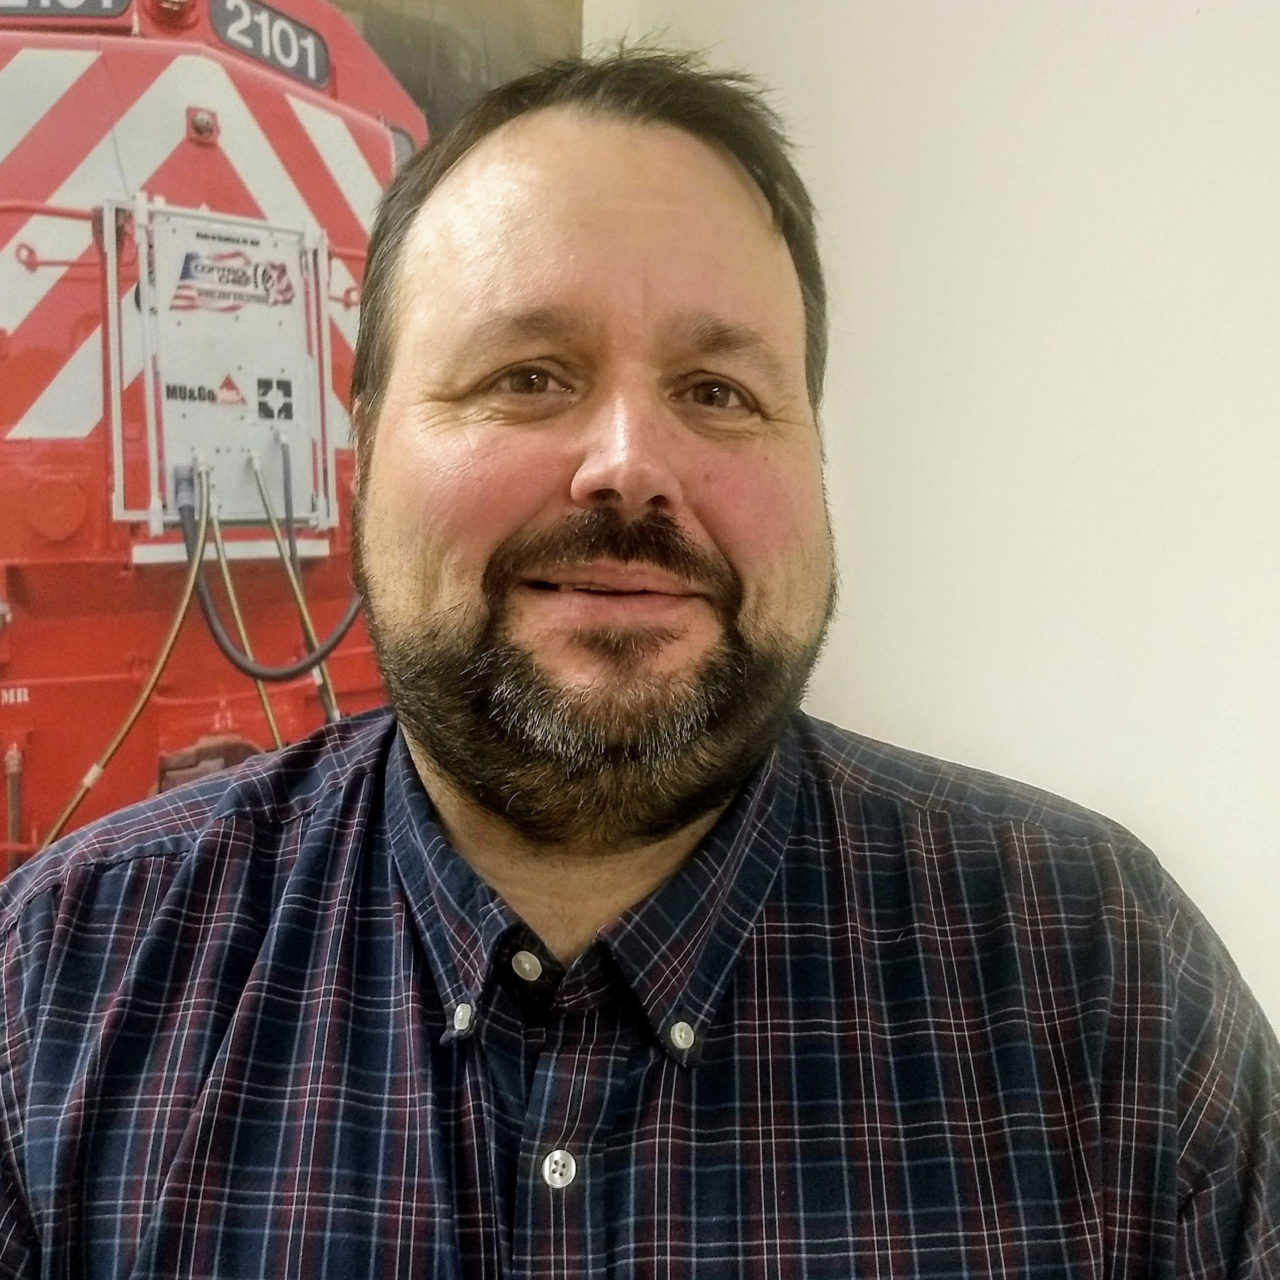 Locomotive Products Manager Dave is our Locomotive Remote Control Guru. Passionate about his job and always ready to help. If Dave's not "on the road" supporting our customers you'll find him working with local youth through the Boy Scouts as a Shooting Sports Director.